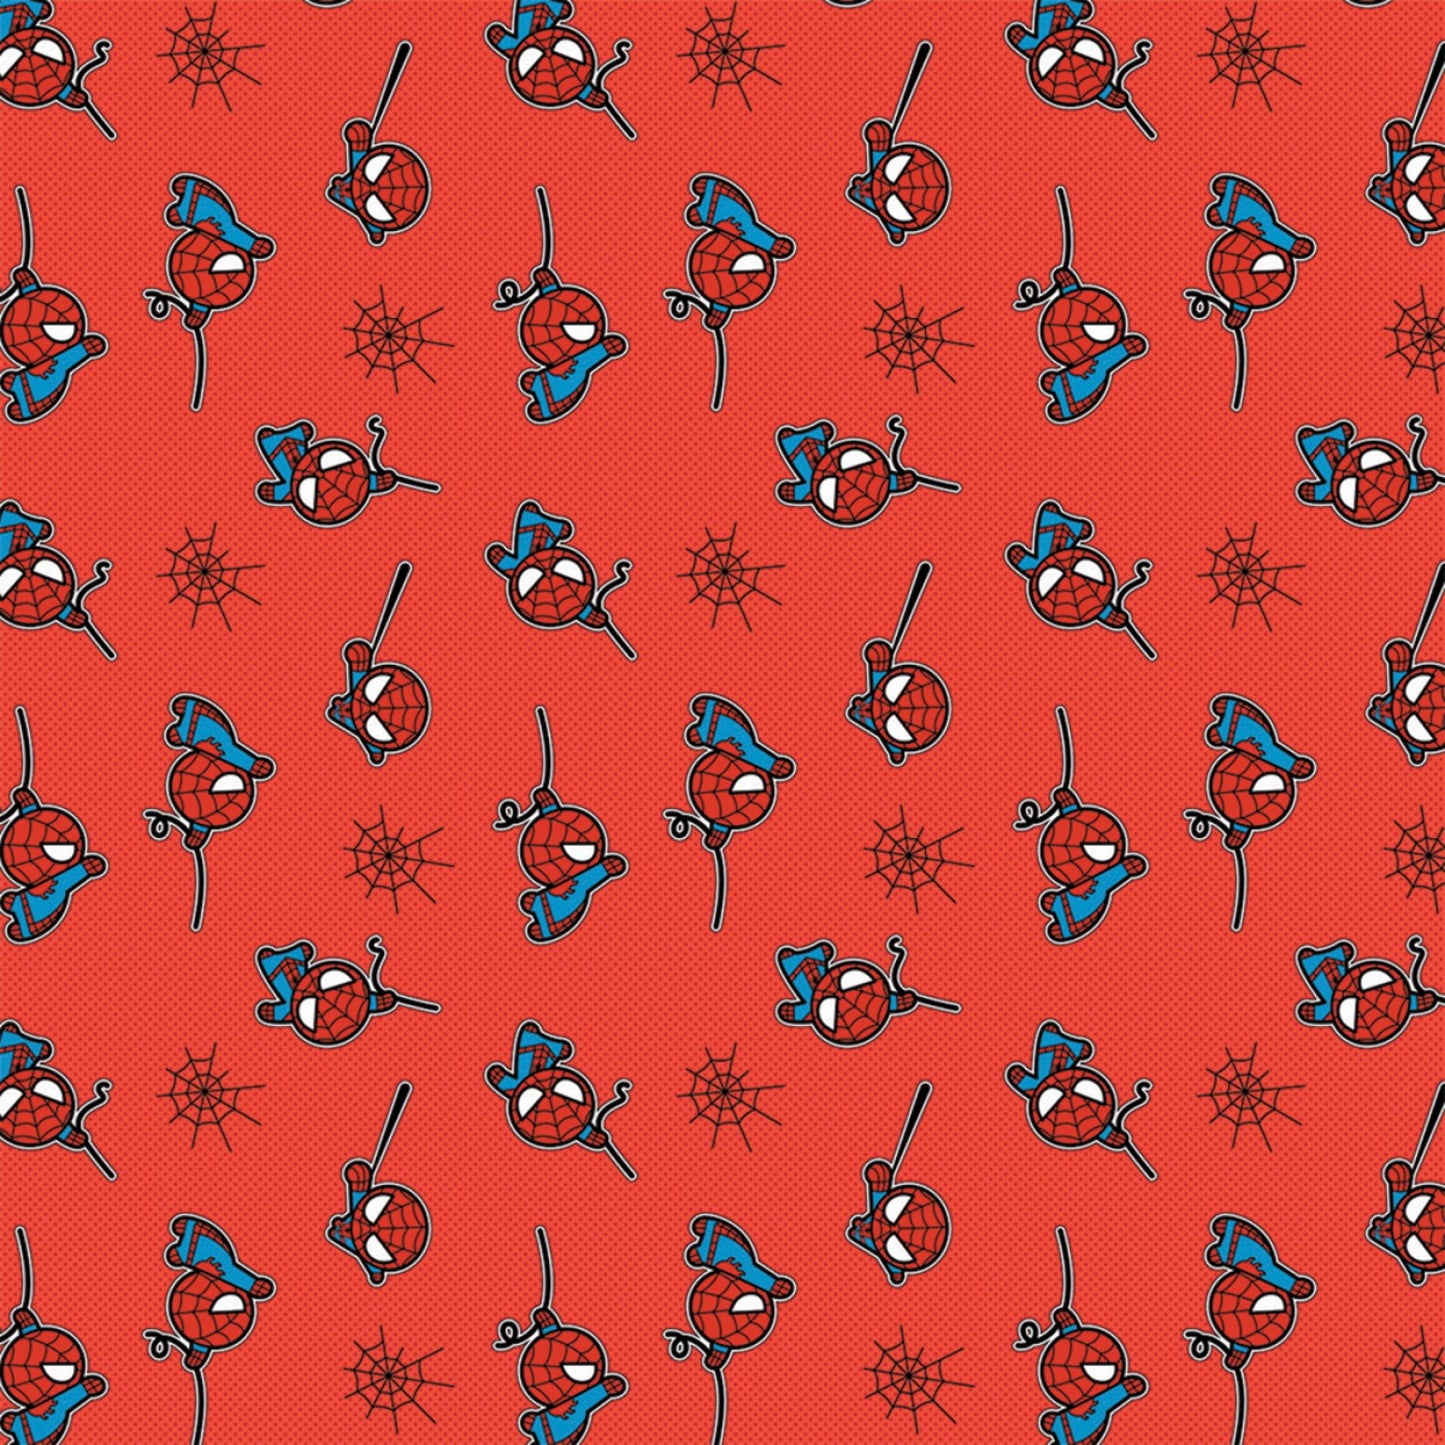 Marvel Kawaii Spiderman Cotton FLANNEL Fabric - Camelot - Red